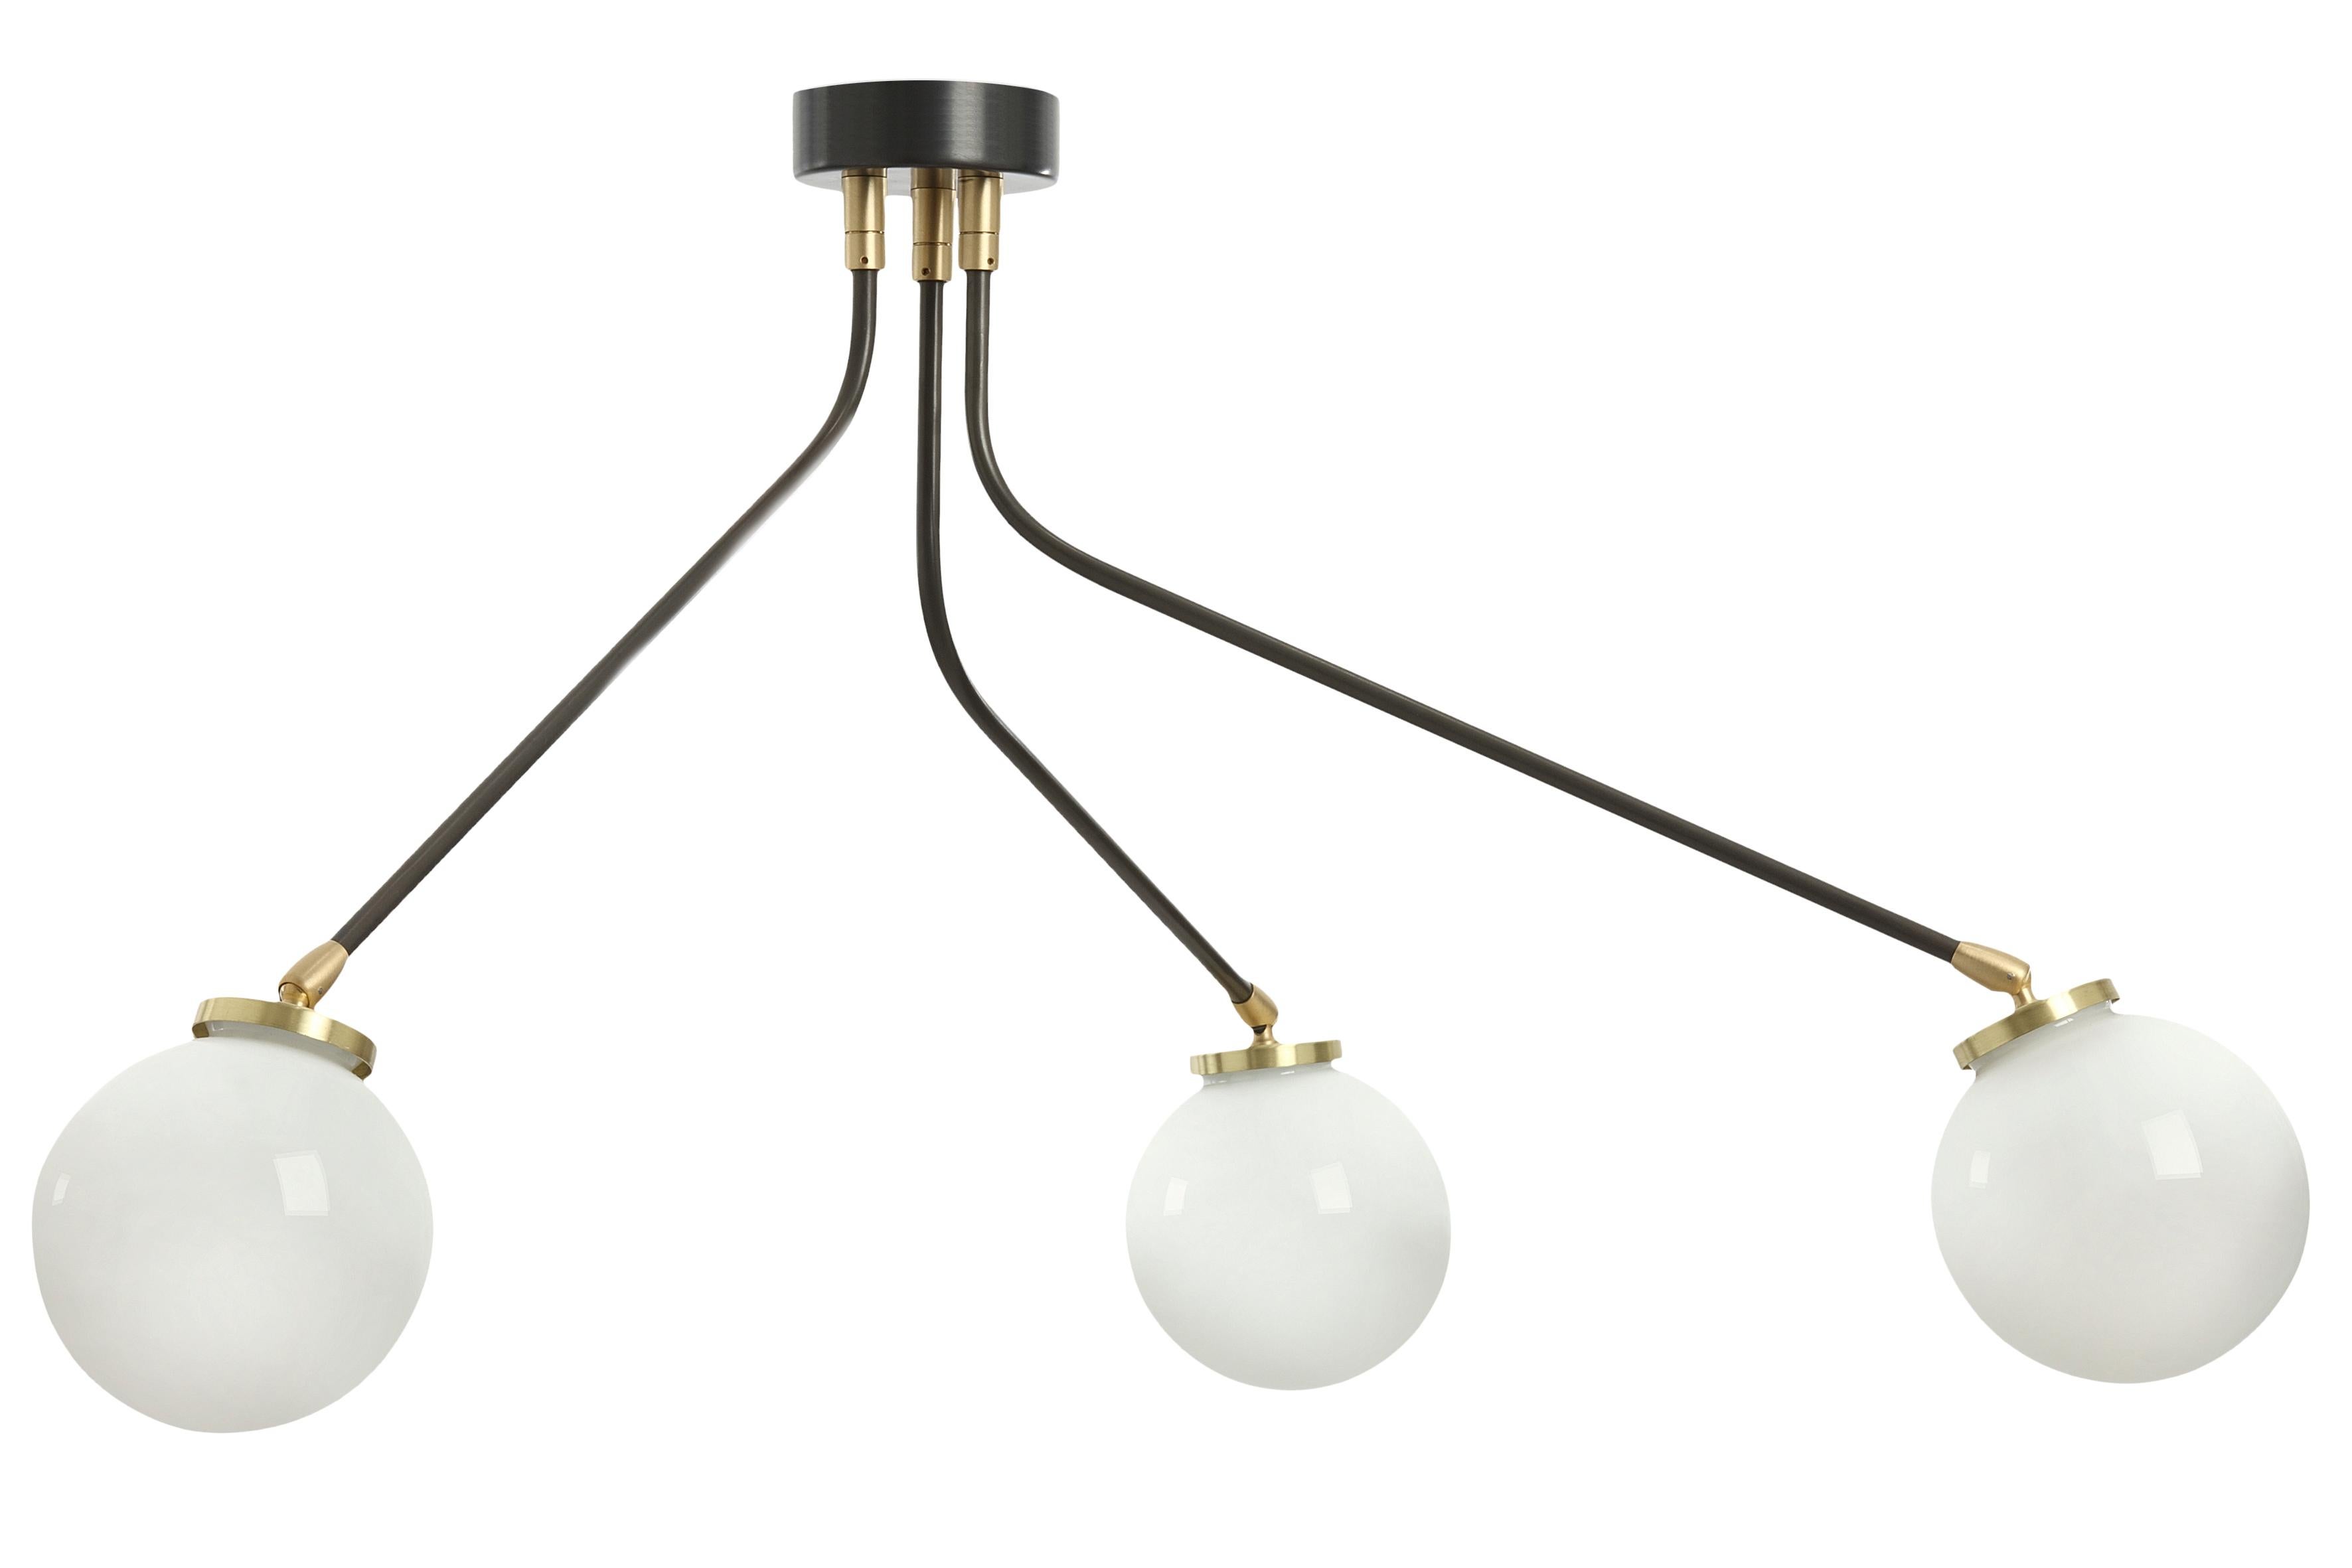 Array mini opal pendant light by CTO Lighting
Materials: bronze with satin brass details and opal glass shades
Dimensions: H 42.5 x W 75 cm

All our lamps can be wired according to each country. If sold to the USA it will be wired for the USA for